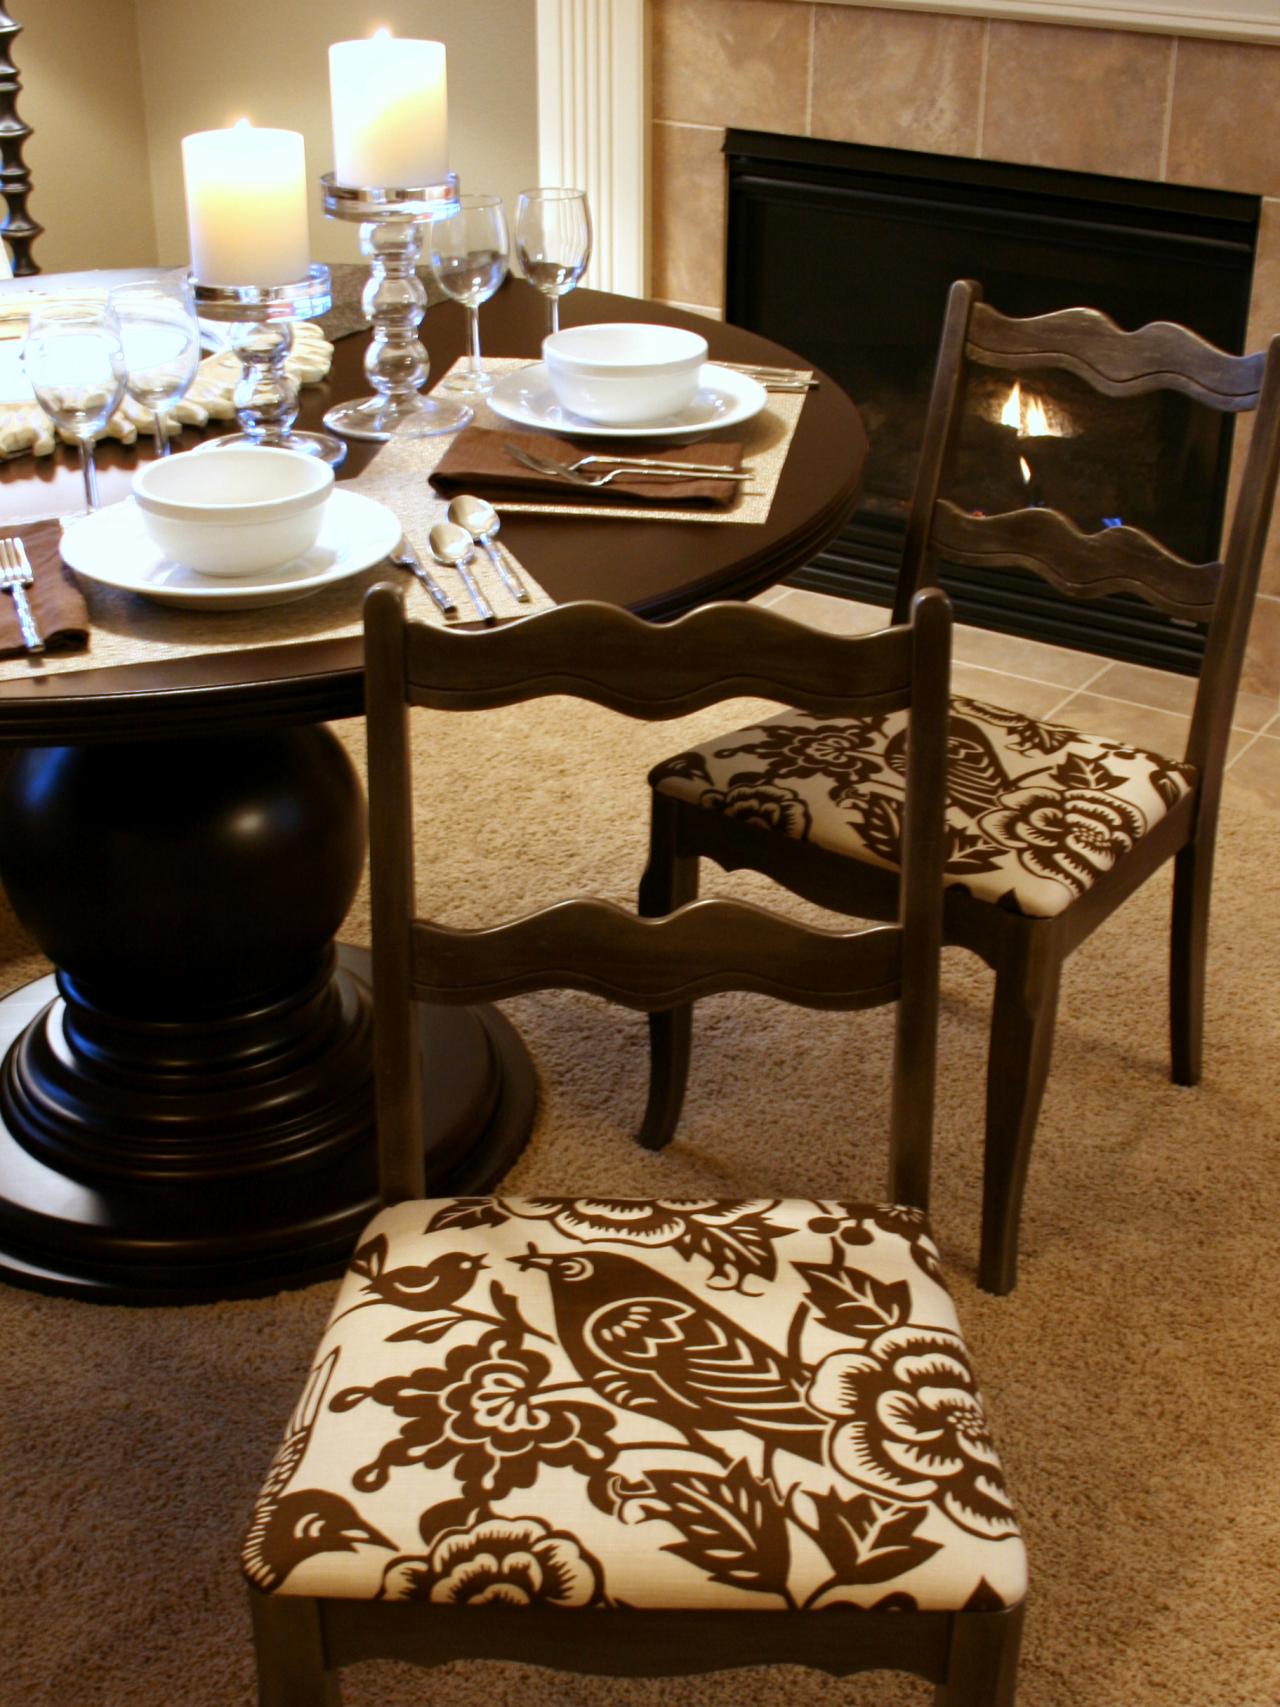 Covers with an ornament on the chairs for the kitchen